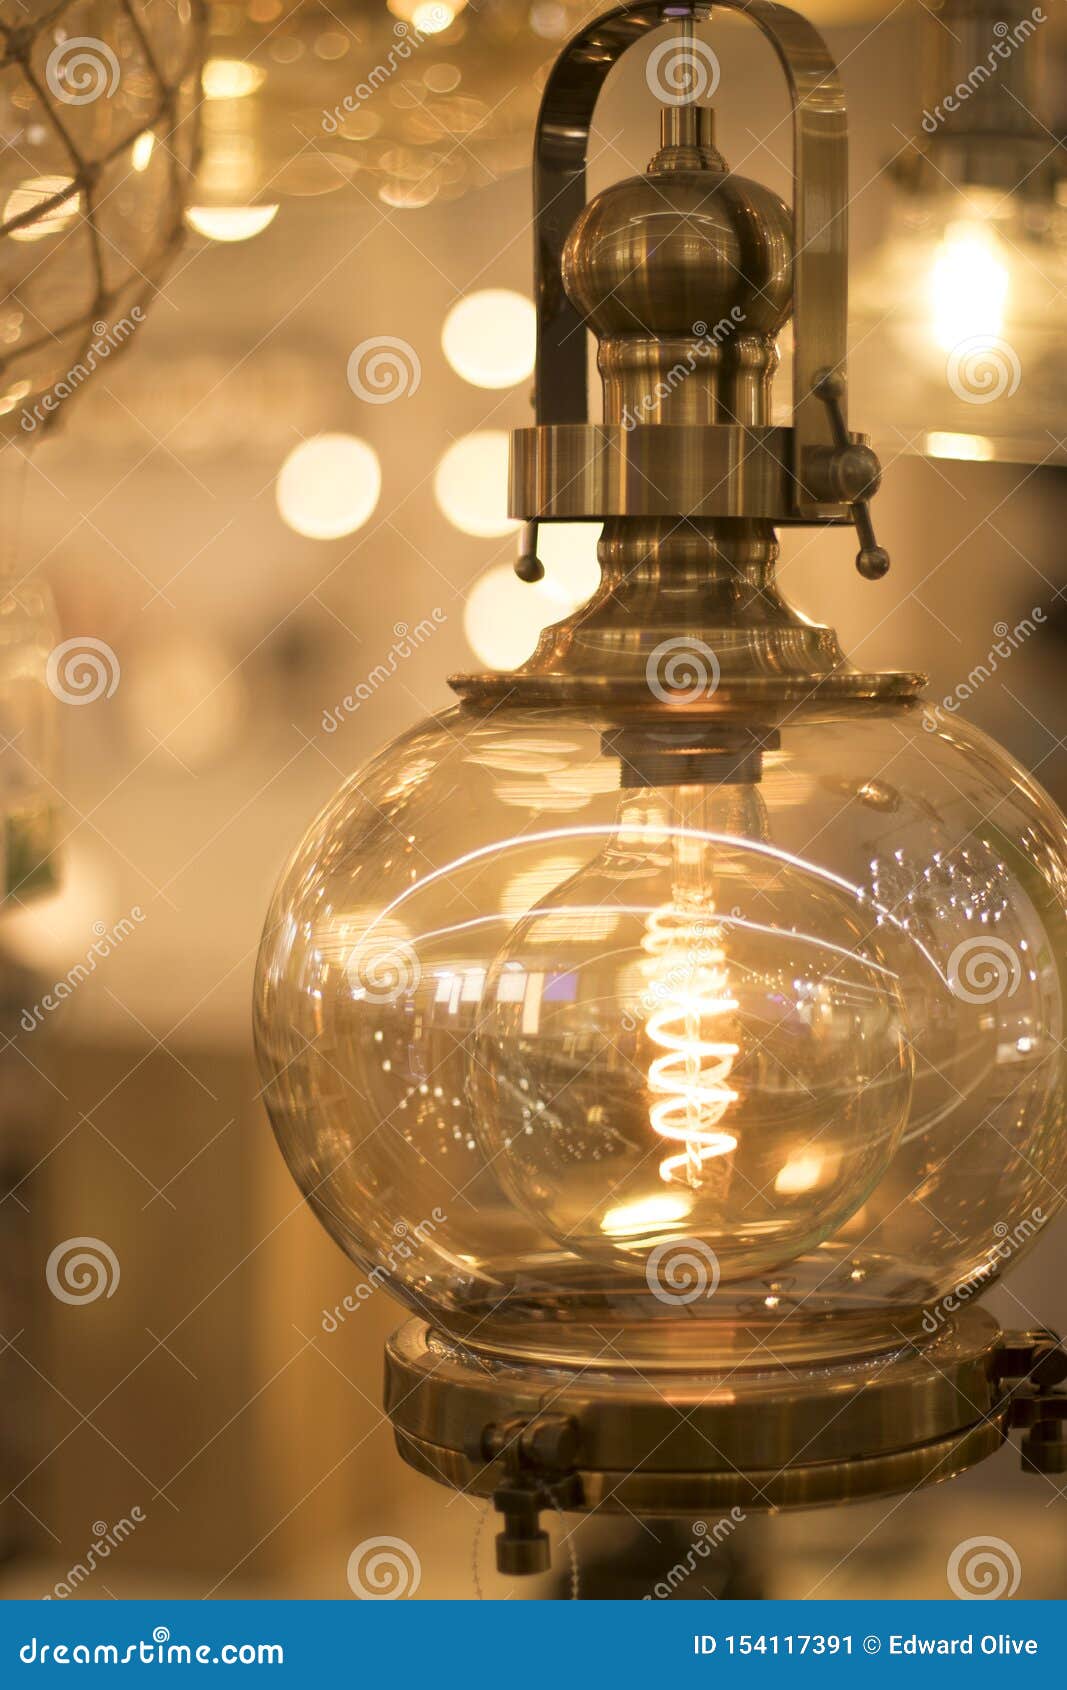 Led Lights Display In Store Stock Image Image Of Business